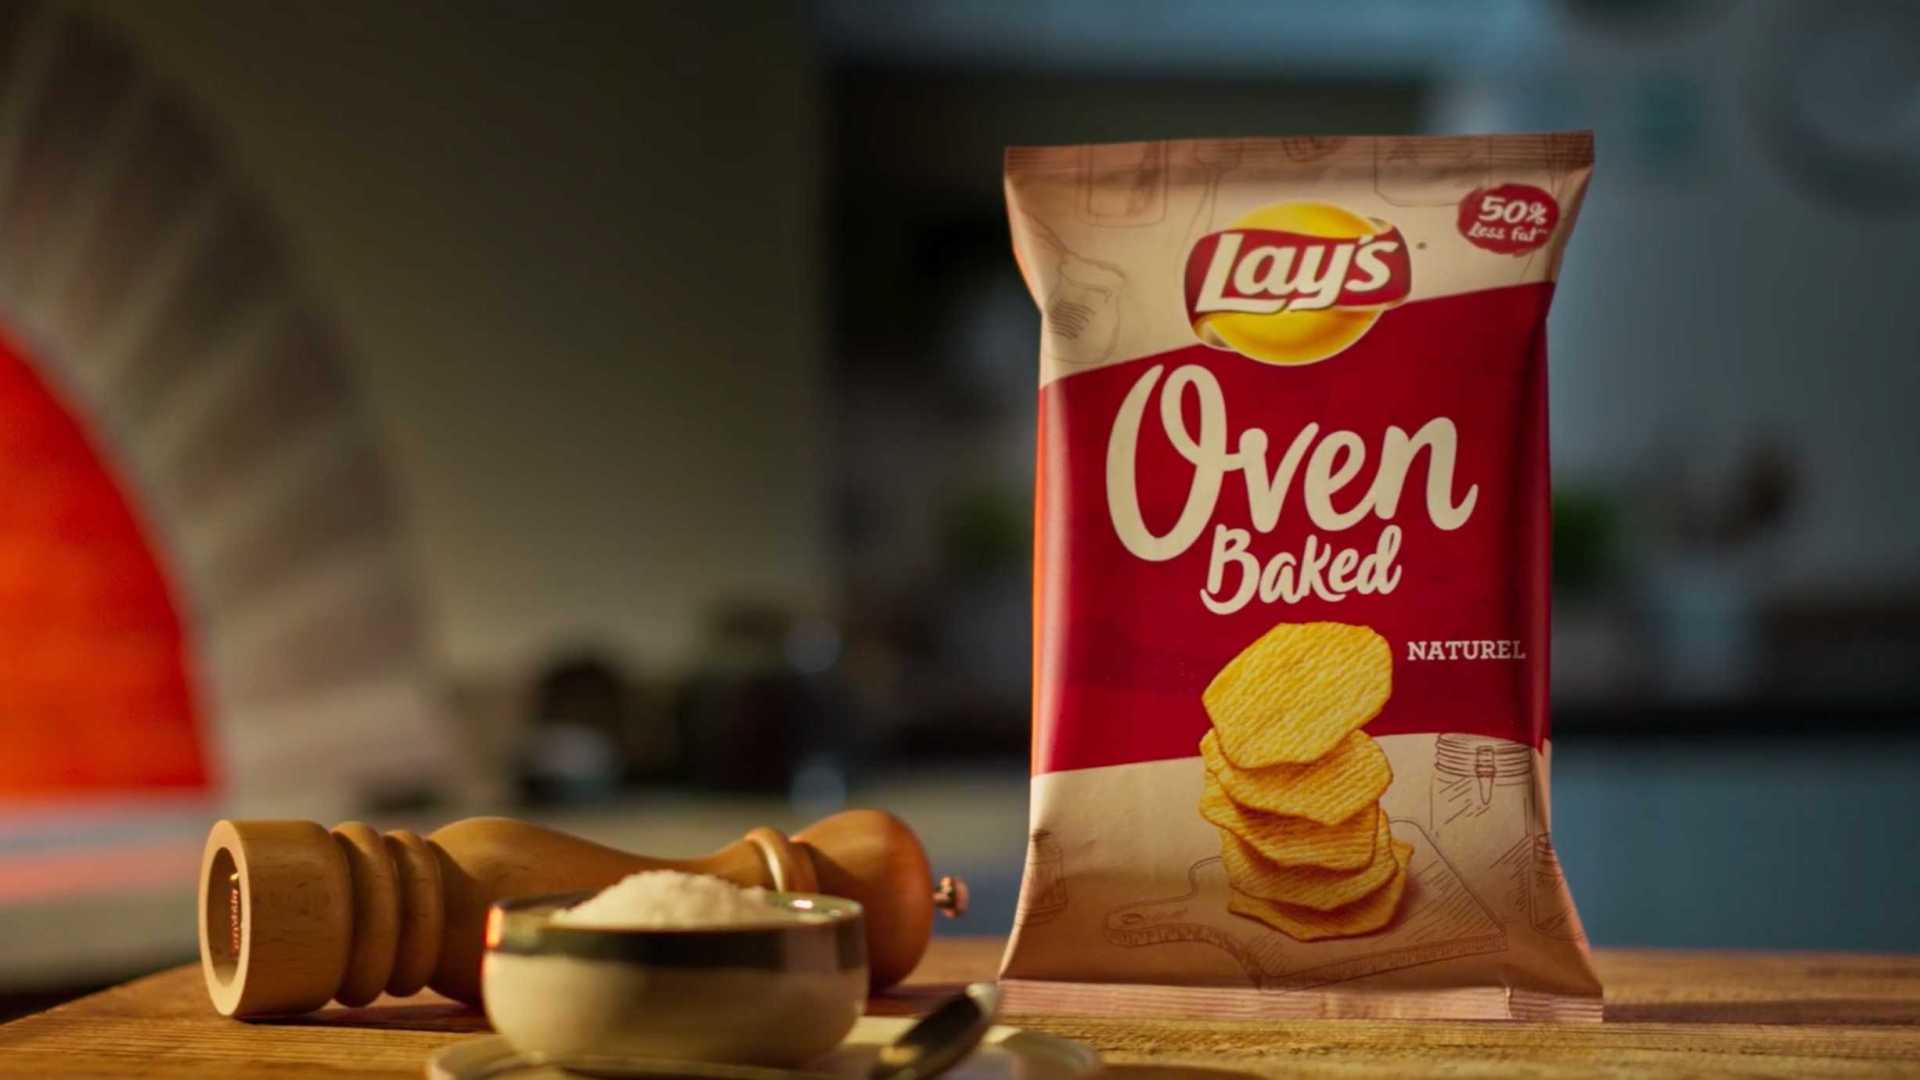 LAYS Oven Baked